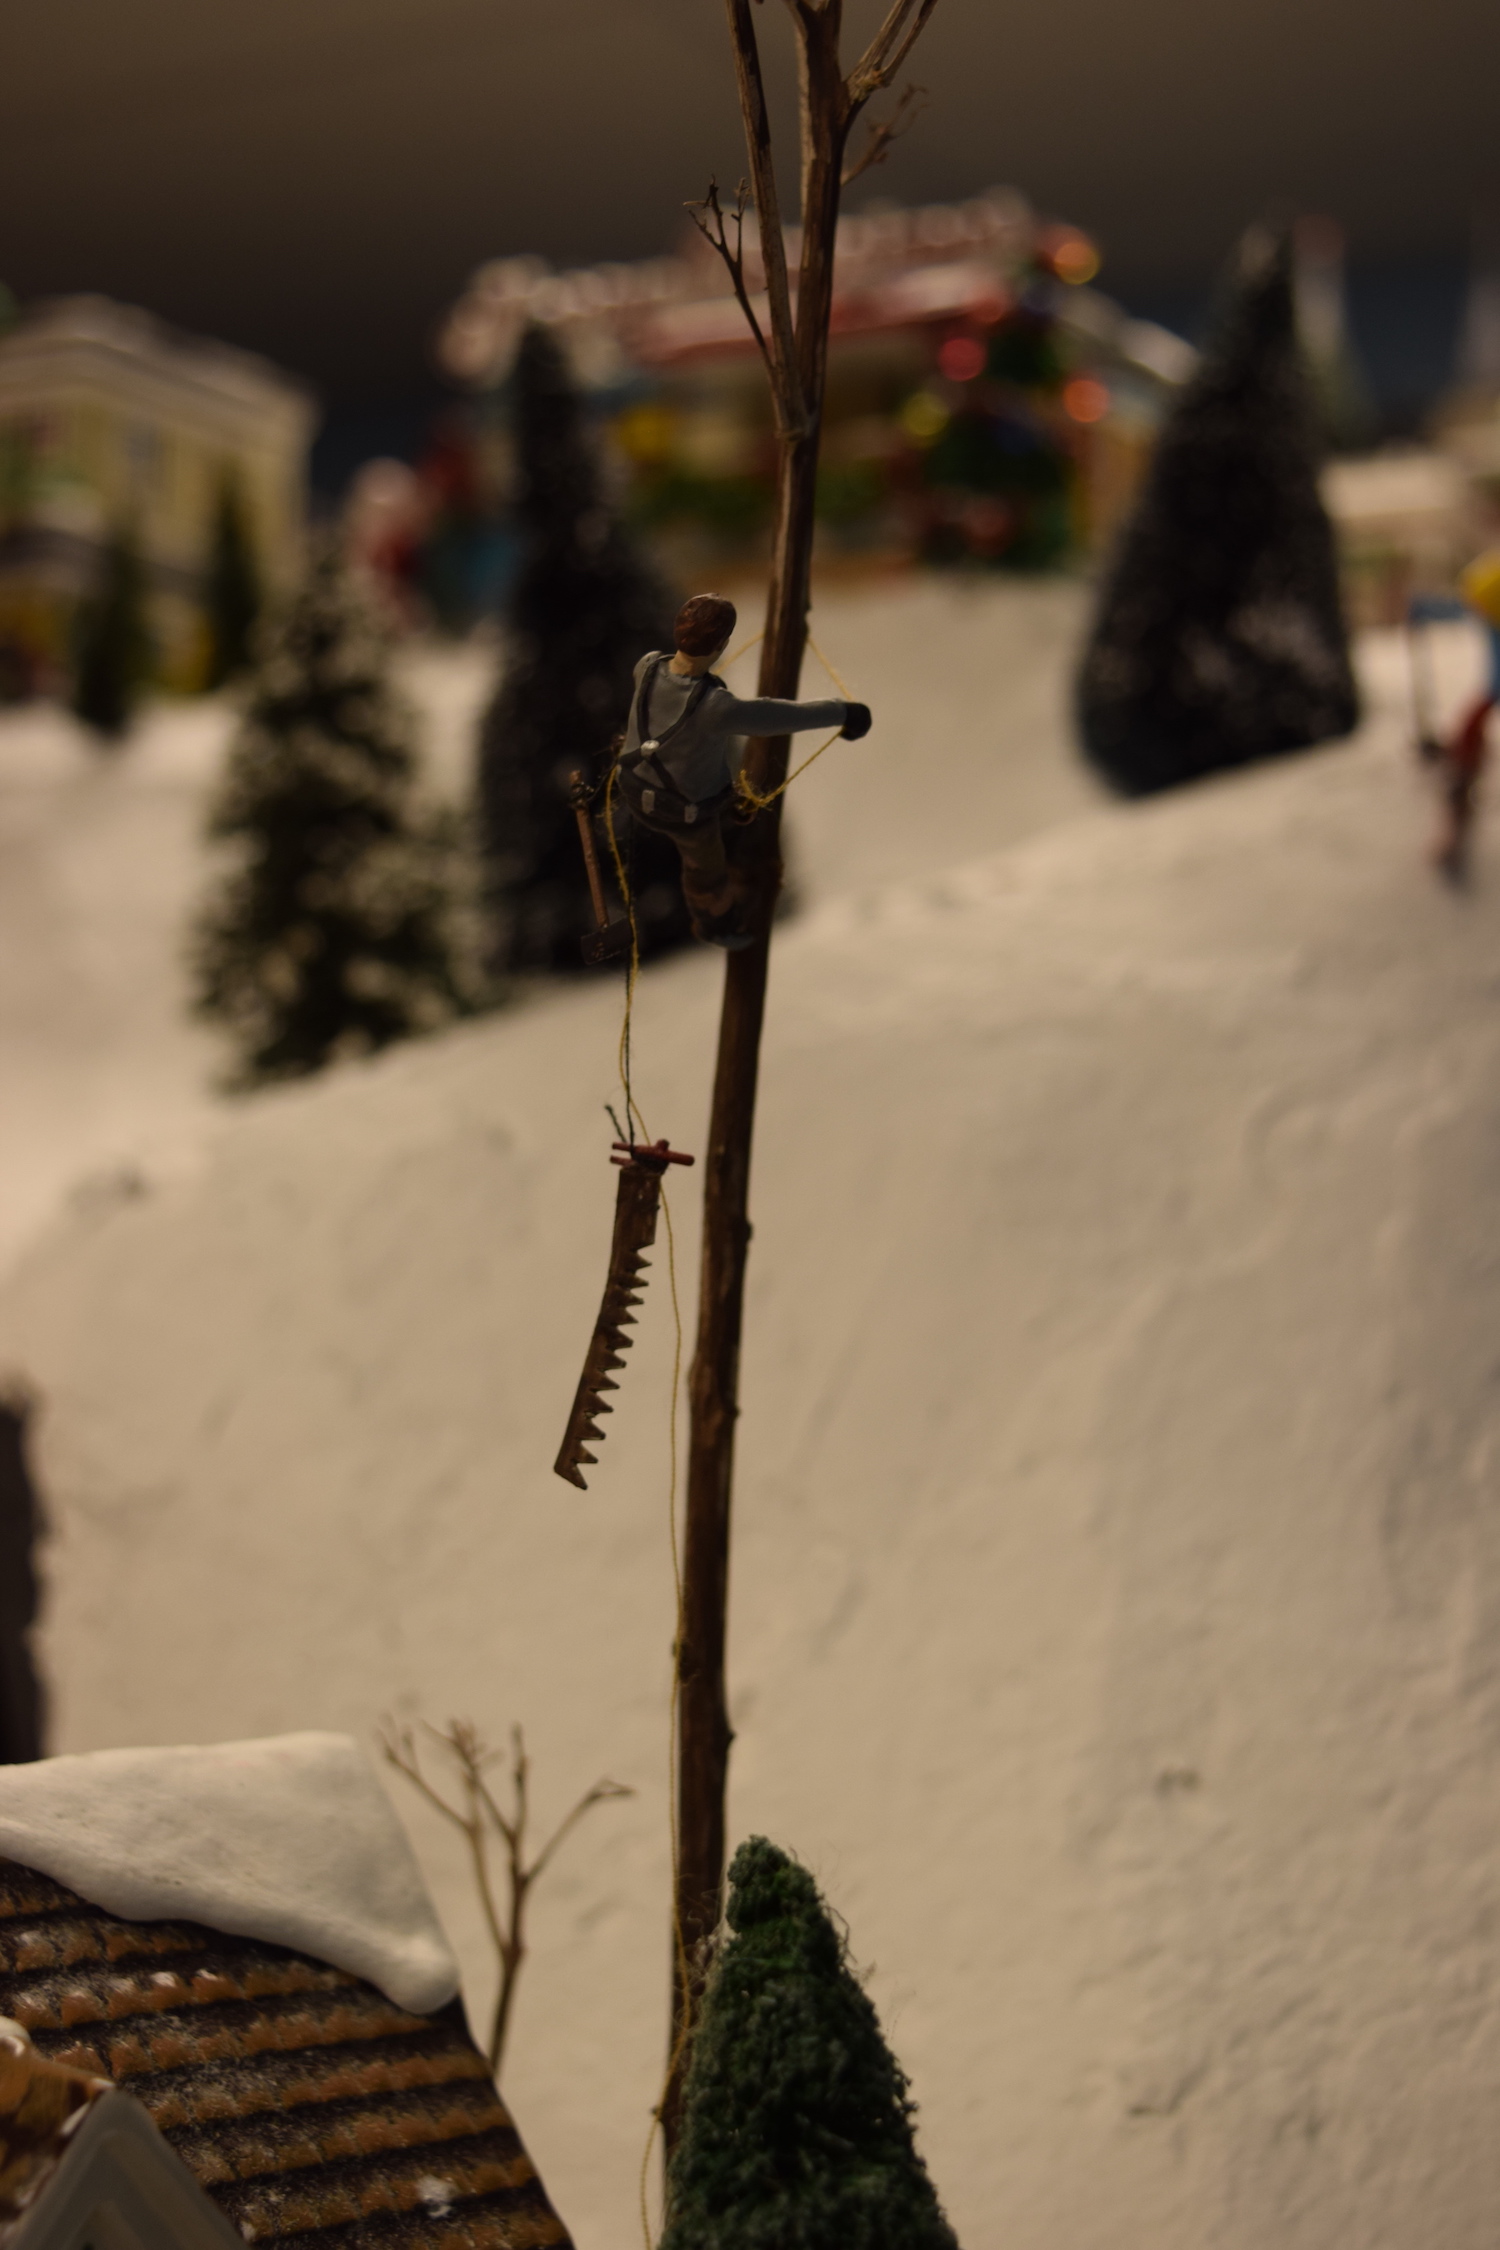 An arborist climbing a tree to make cuts, with a saw dangling from a rope - "Christmas at the Roundhouse" model train display.